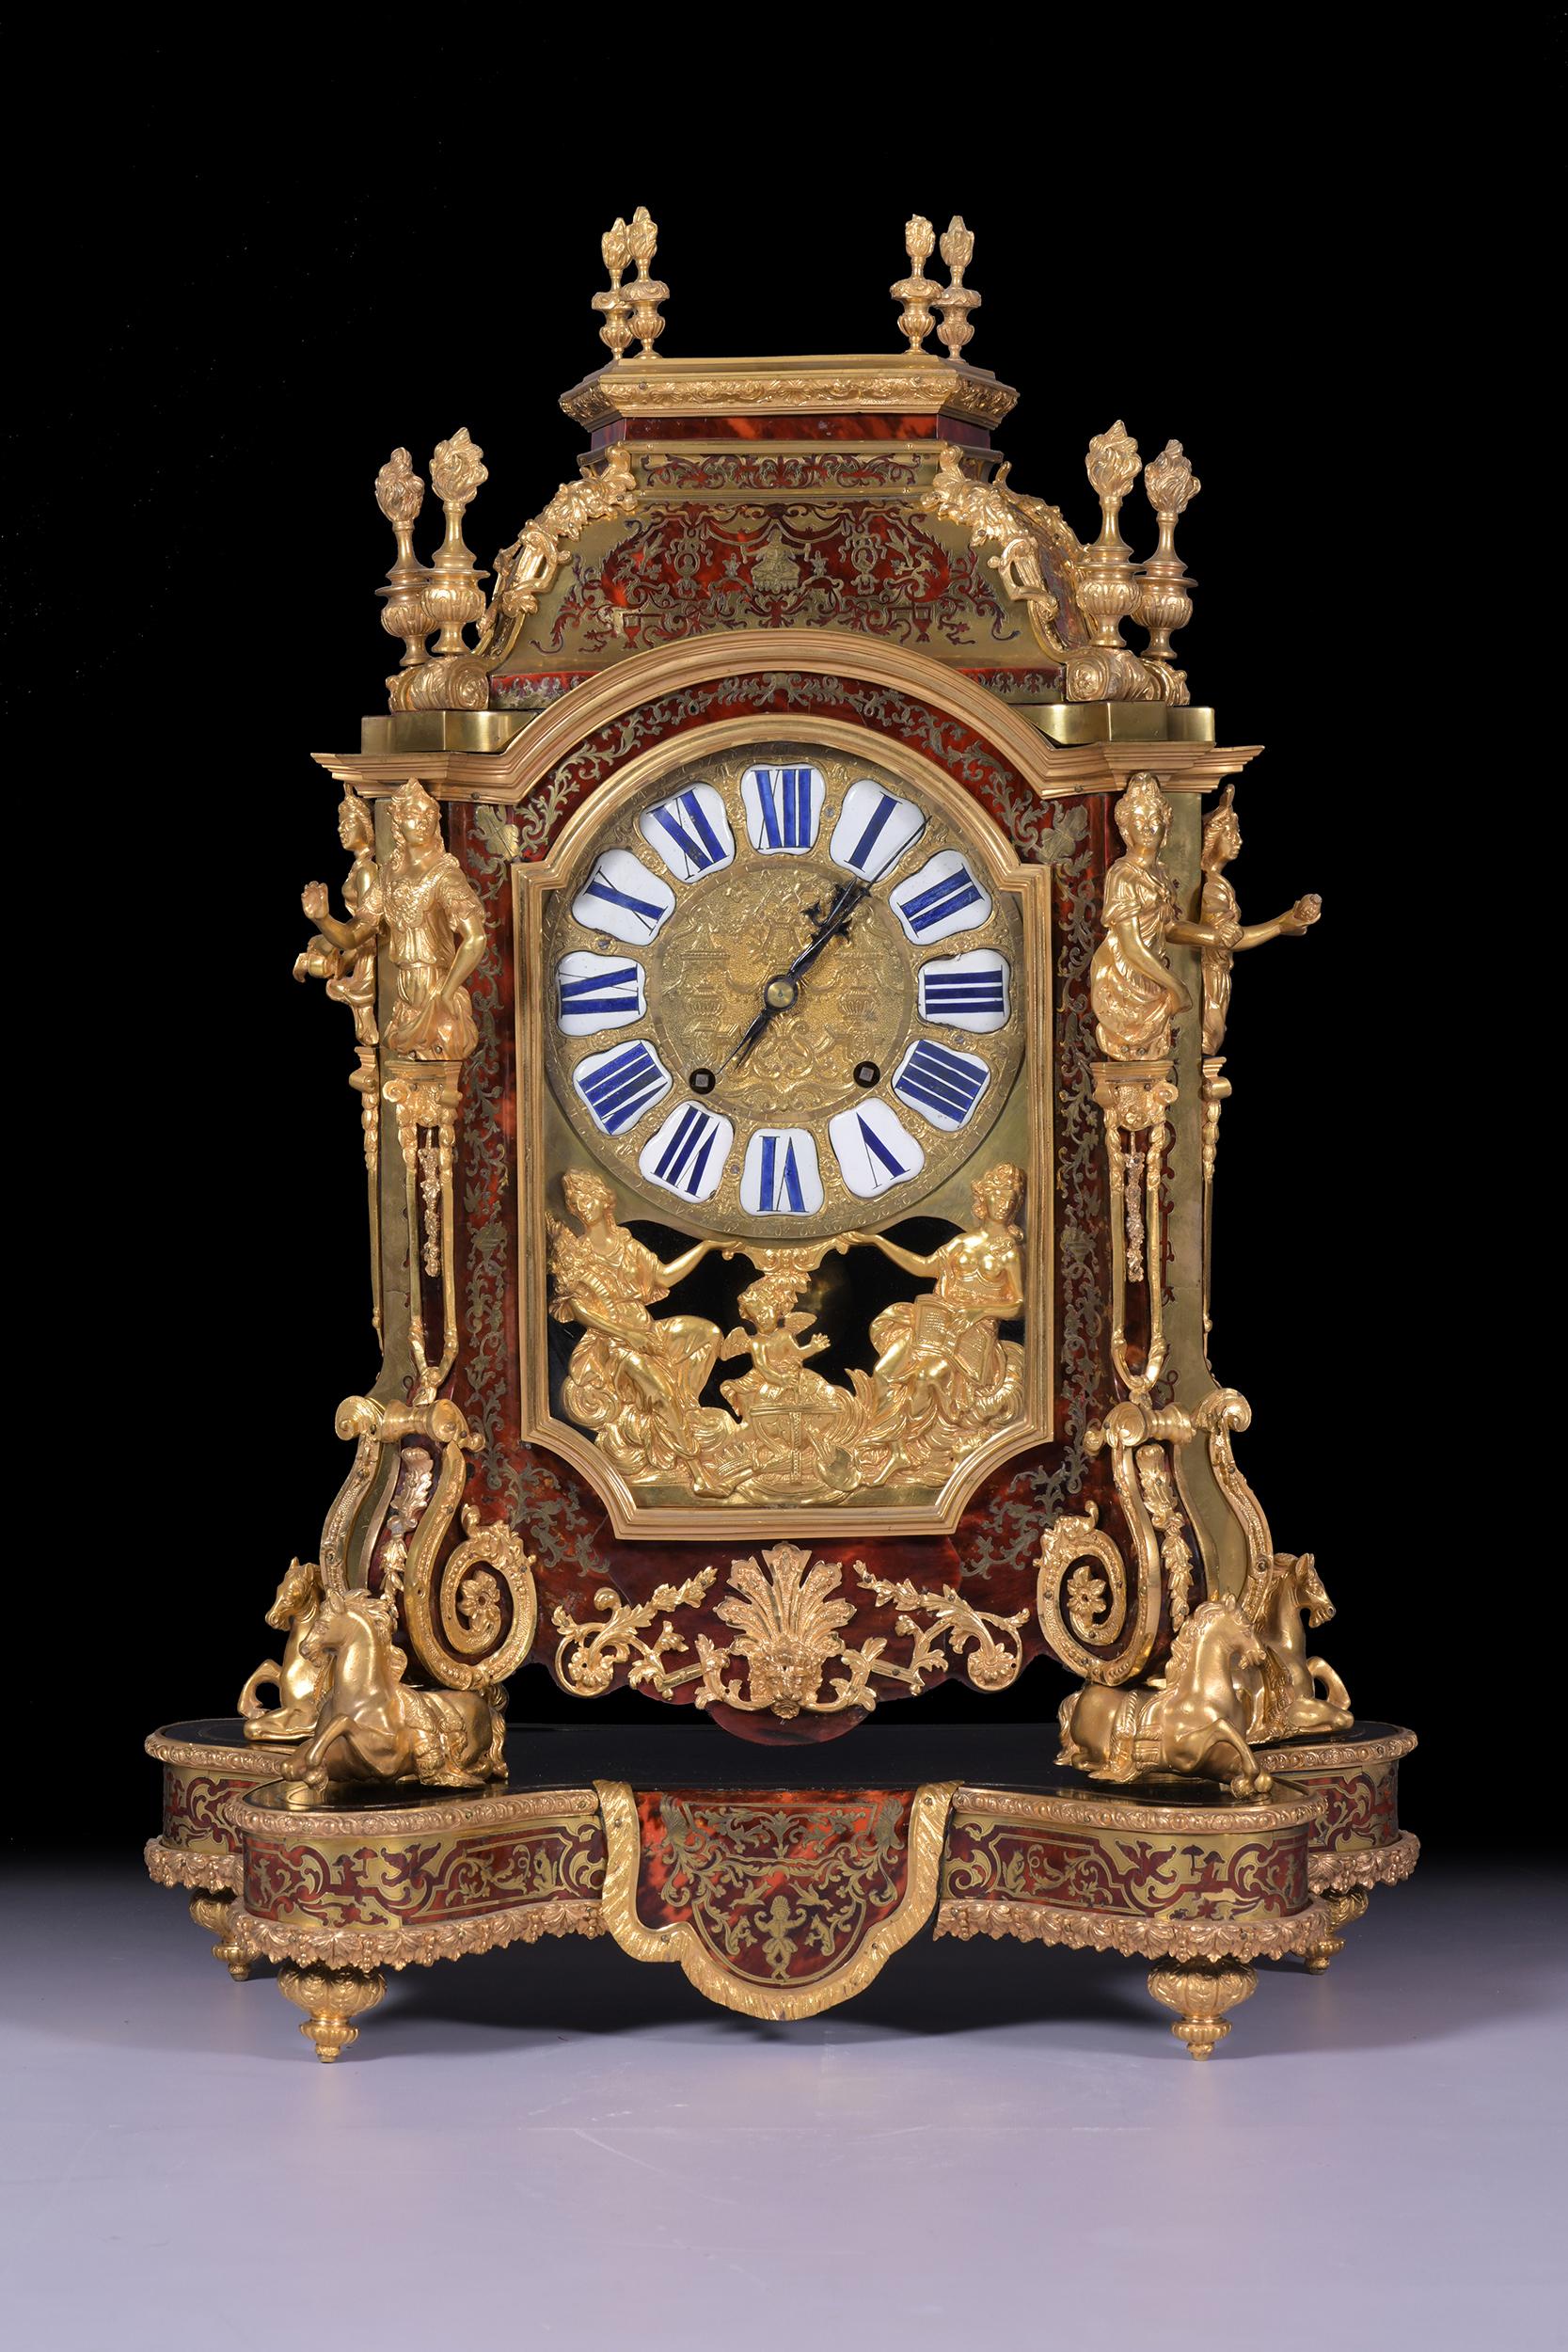 An exceptional 19th century French ormolu-mounted, boulle and cut brass-inlaid mantel clock In the Regence style, after André-Charles Boulle. The stepped pediment surmounted by four small and four larger flaming vase finials, the domed pediment with